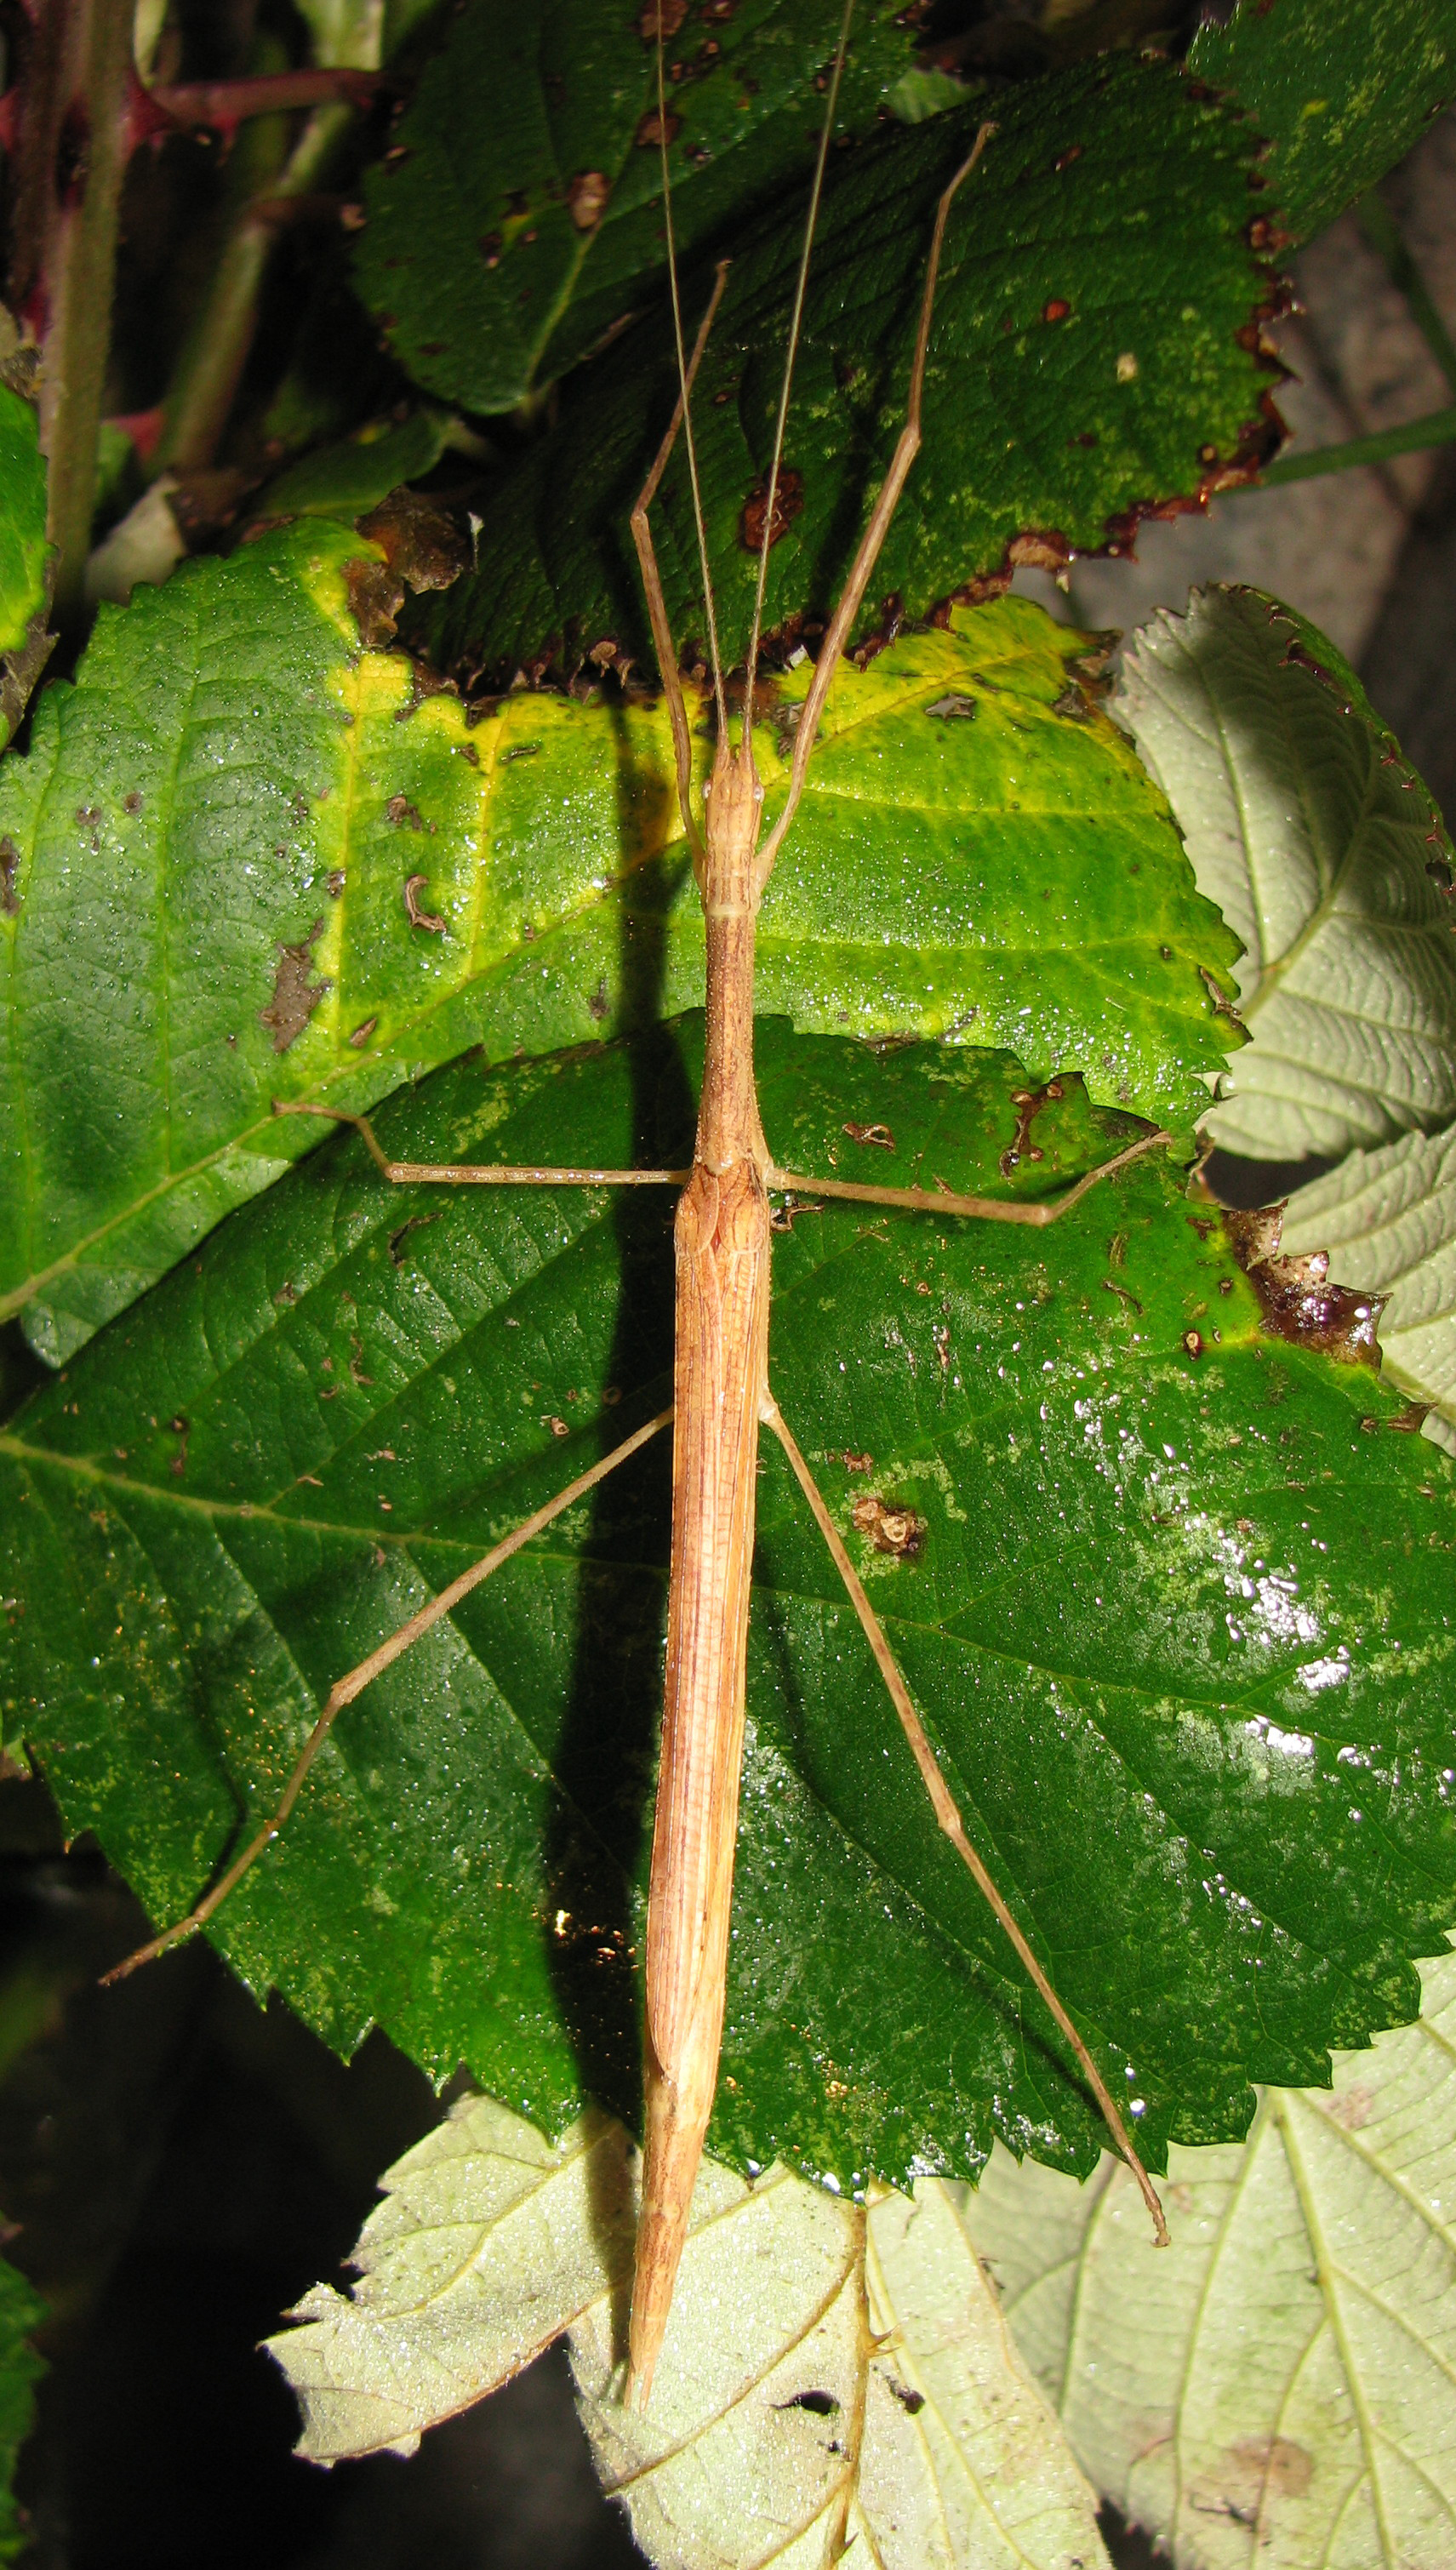 stick insect to never own